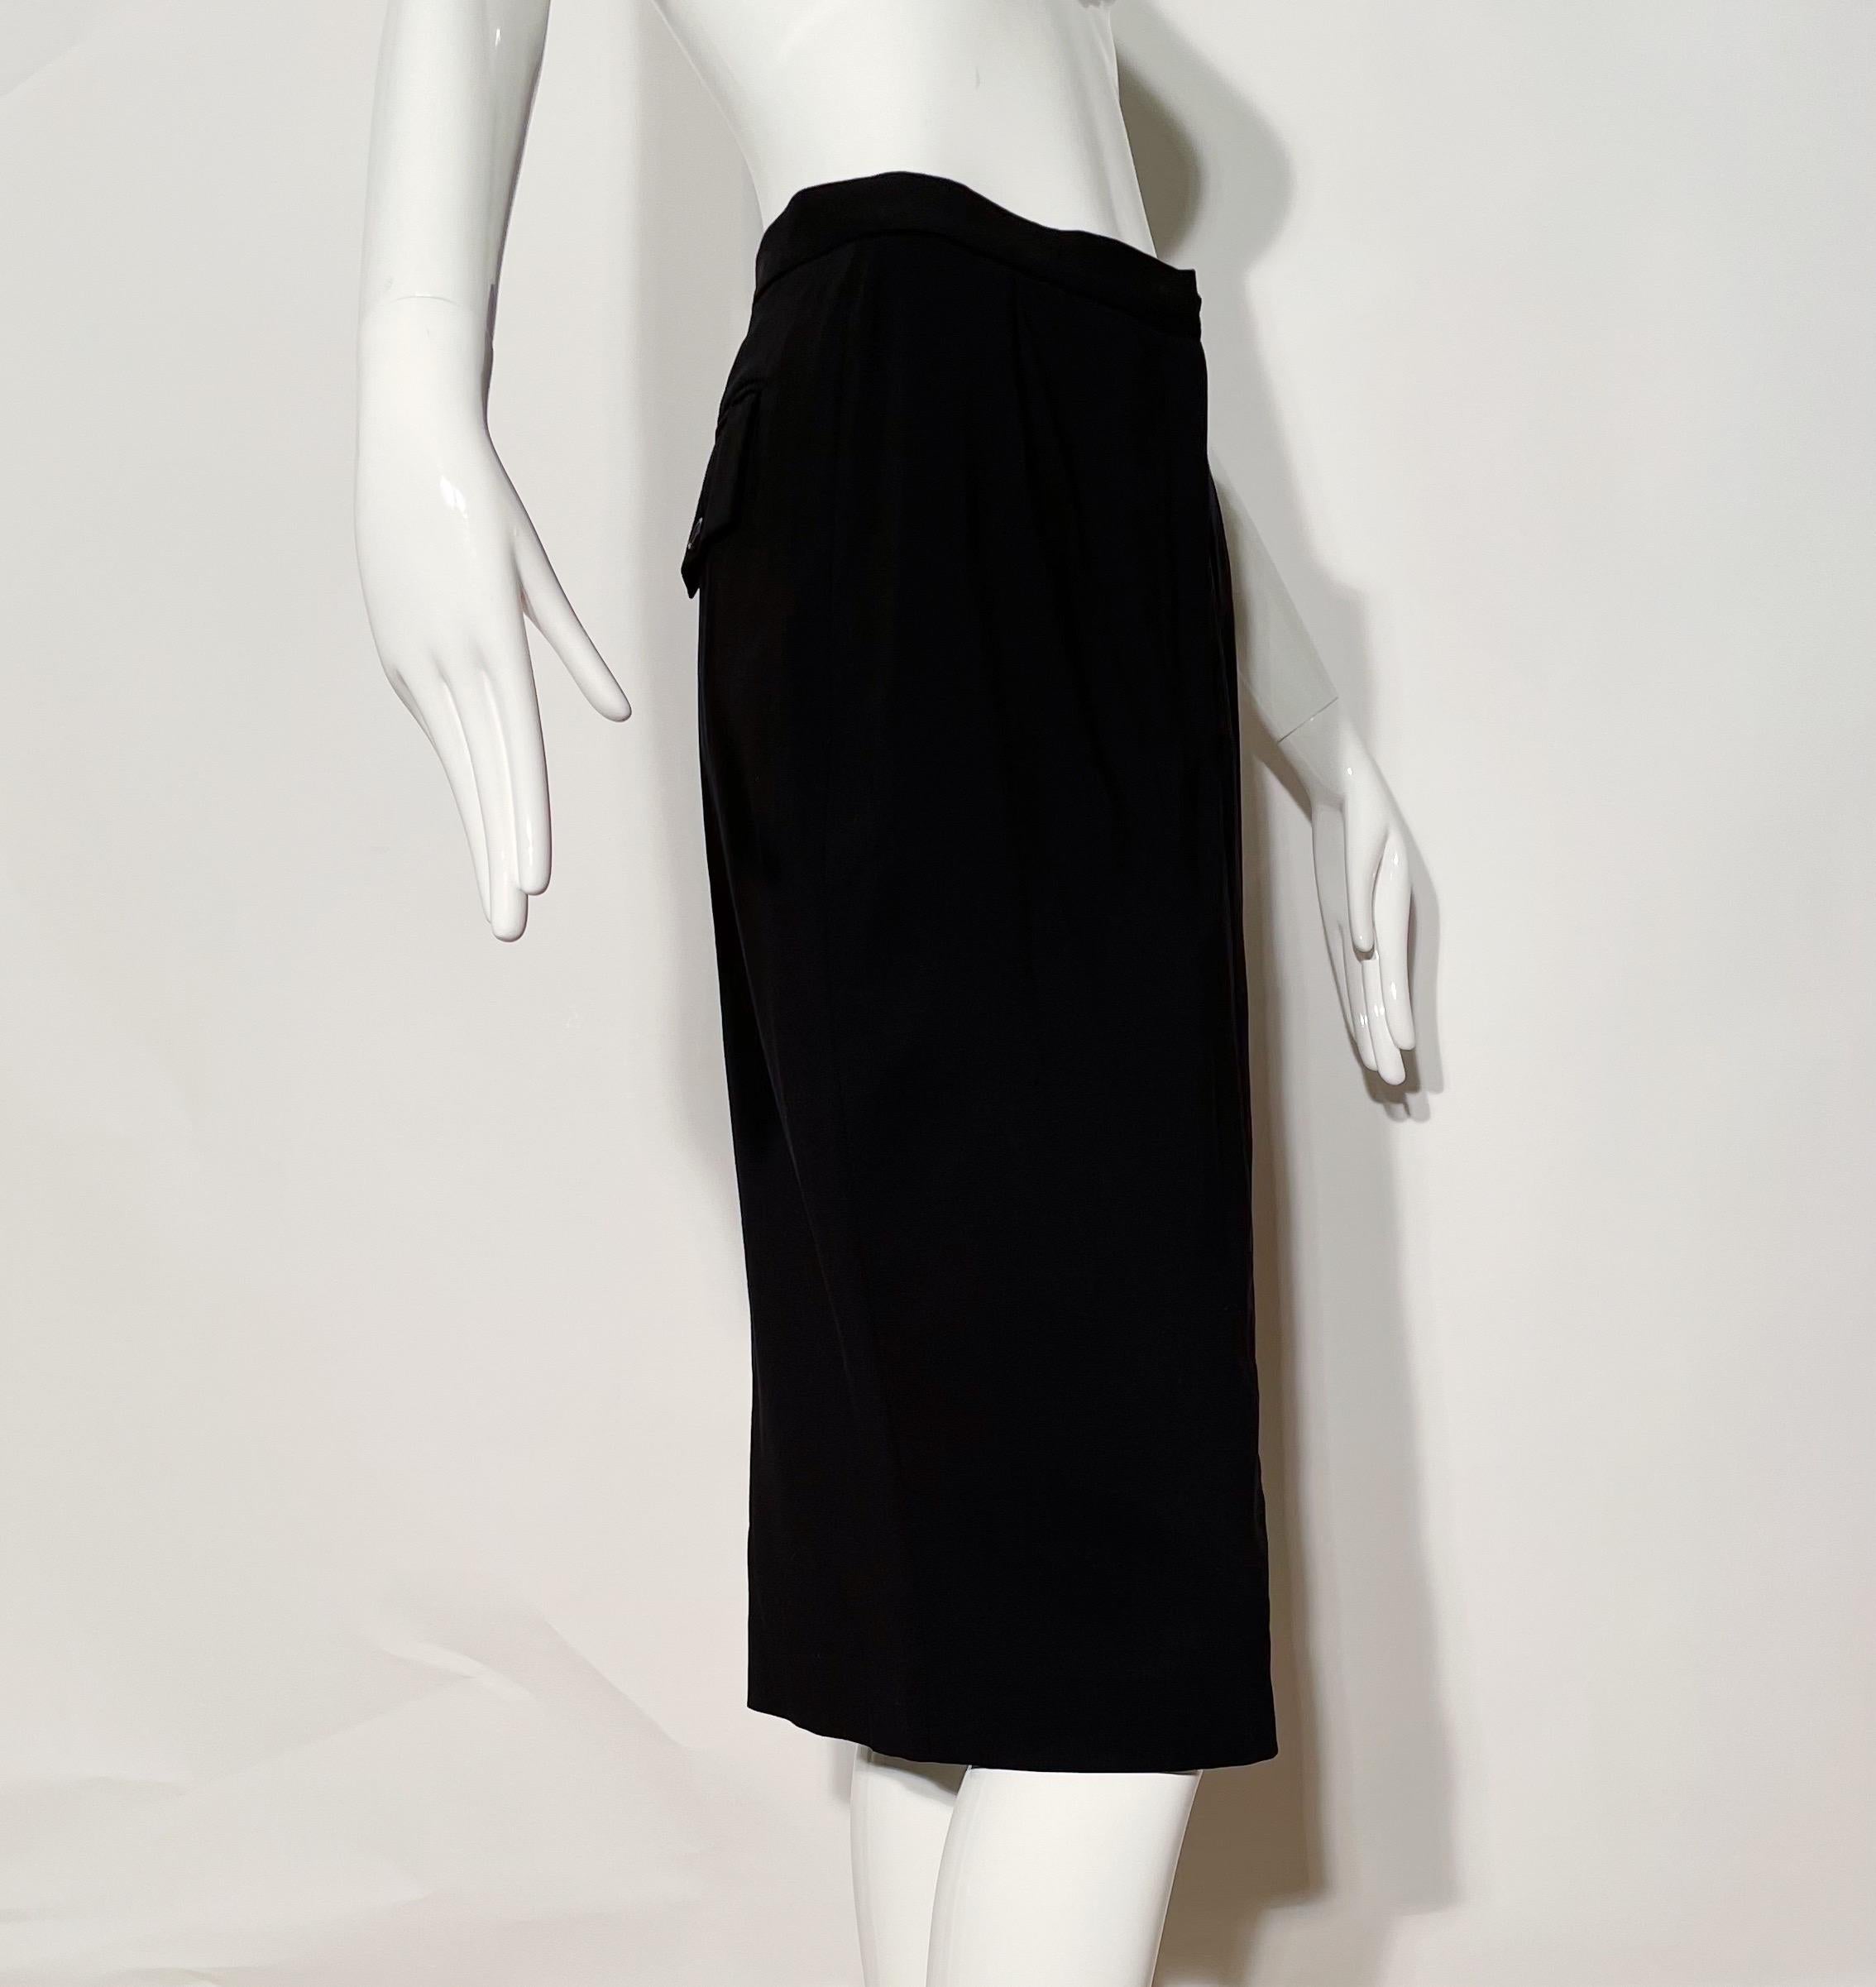 Black pencil skirt. Front clasp closure. Rear back pockets. Wool and nylon blend. Made in Italy. 
*Condition: Excellent vintage condition. No visible flaws.

Measurements Taken Laying Flat (inches)—
Waist: 26 in.
Hip: 34 in.
Length: 27 in.
Marked